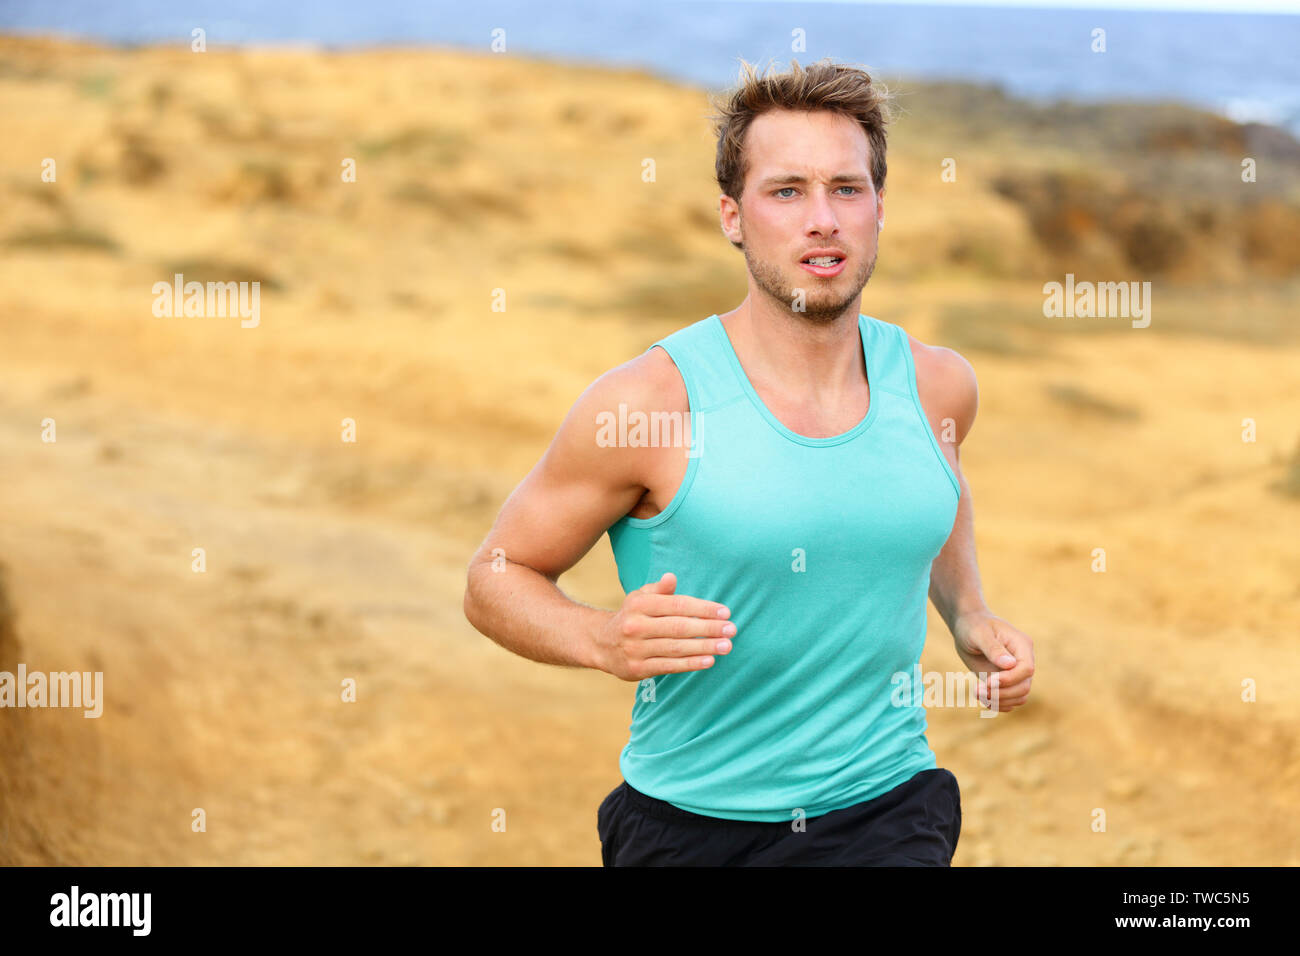 Man running outdoors in nature. Fit male runner jogging outside training cross country trail running. Handsome male sports fitness model in his 20s. Stock Photo